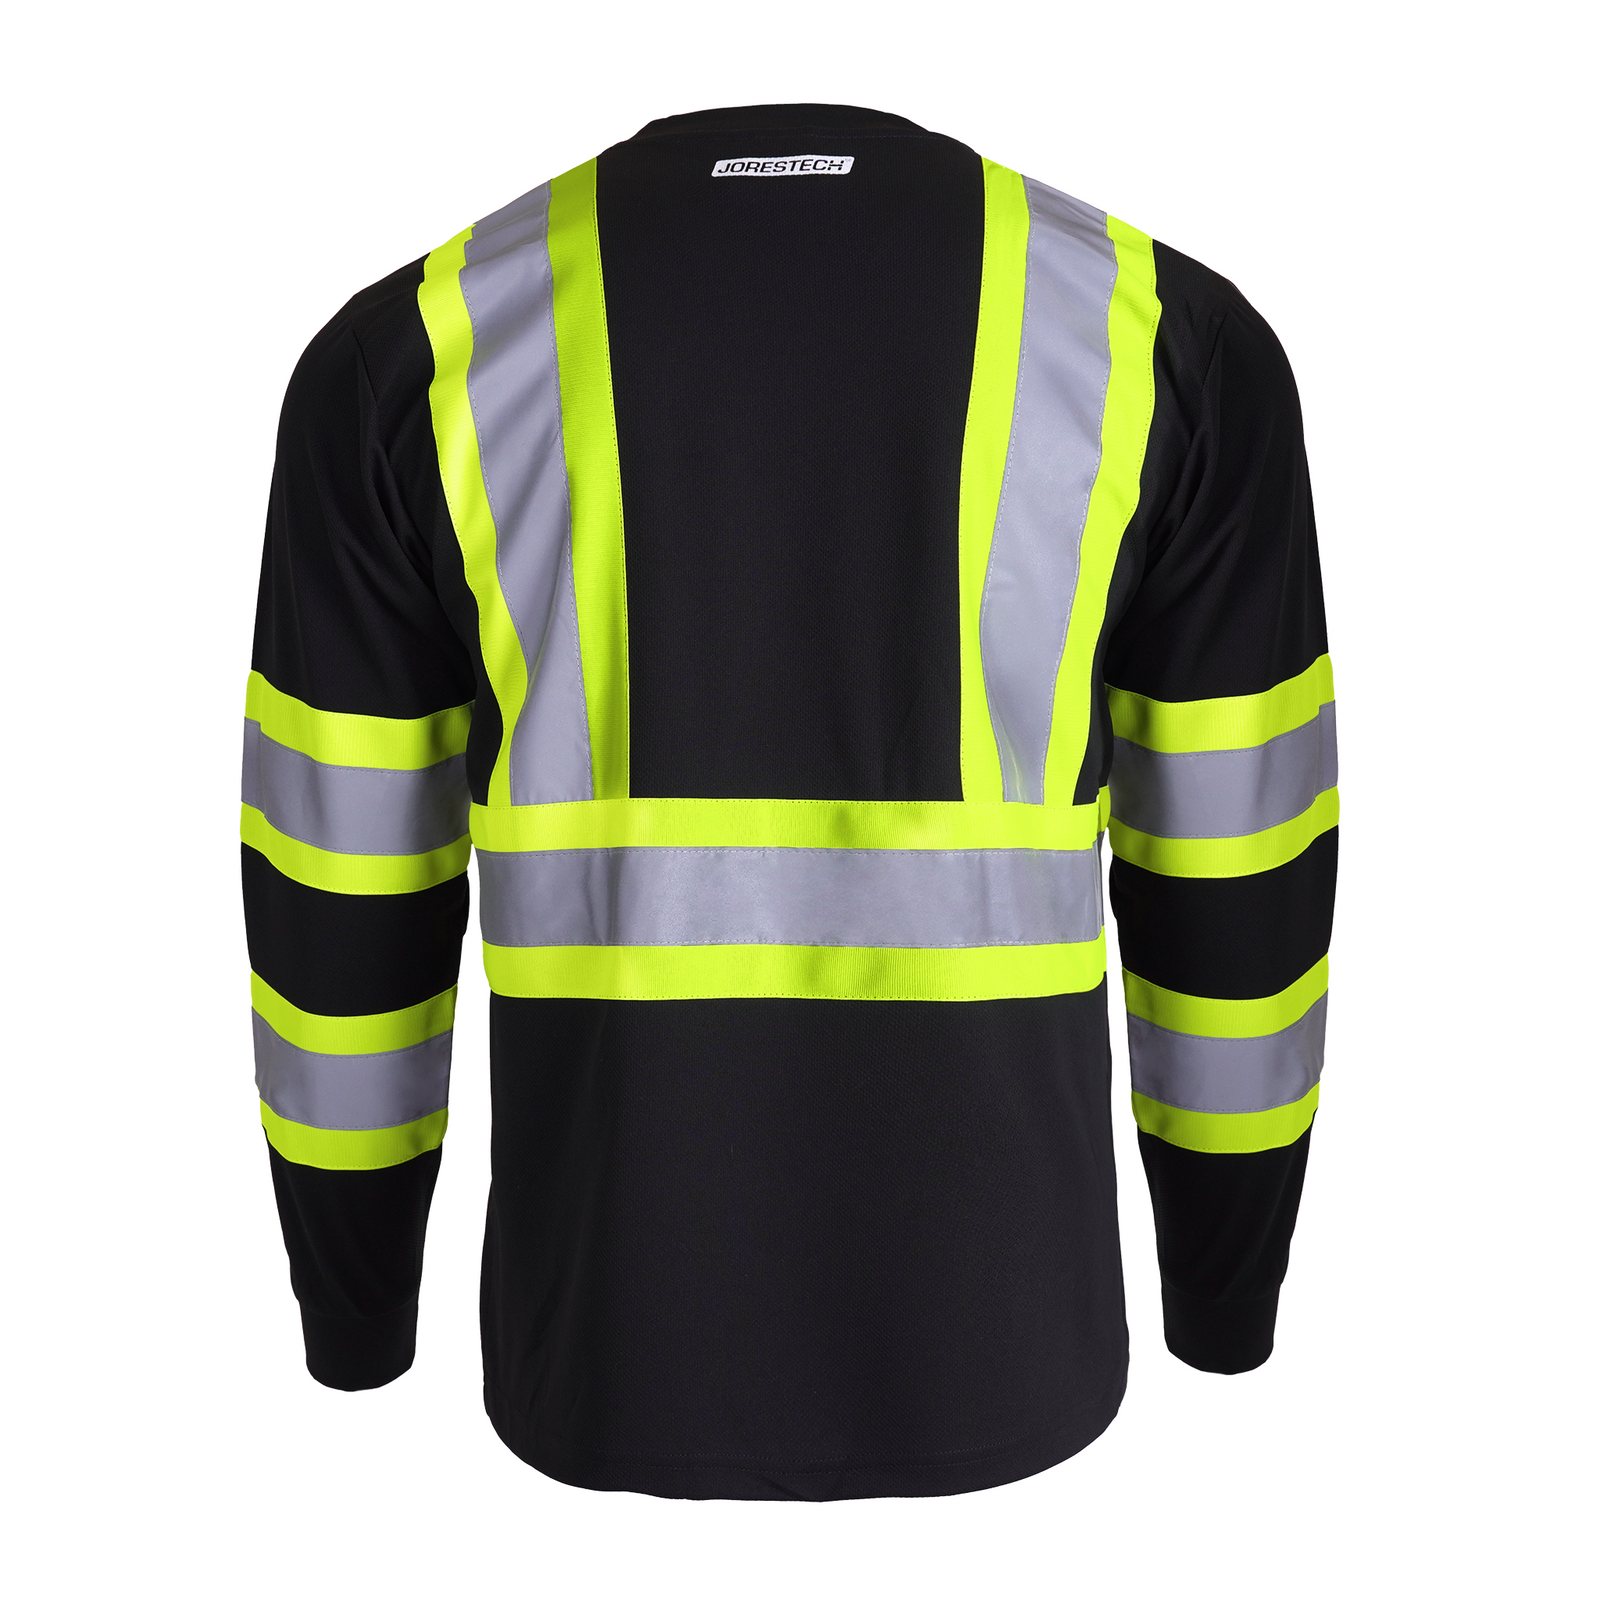 Back of the JORESTECH Hi-vis reflective two tone long sleeve safety black and yellow pocket shirt